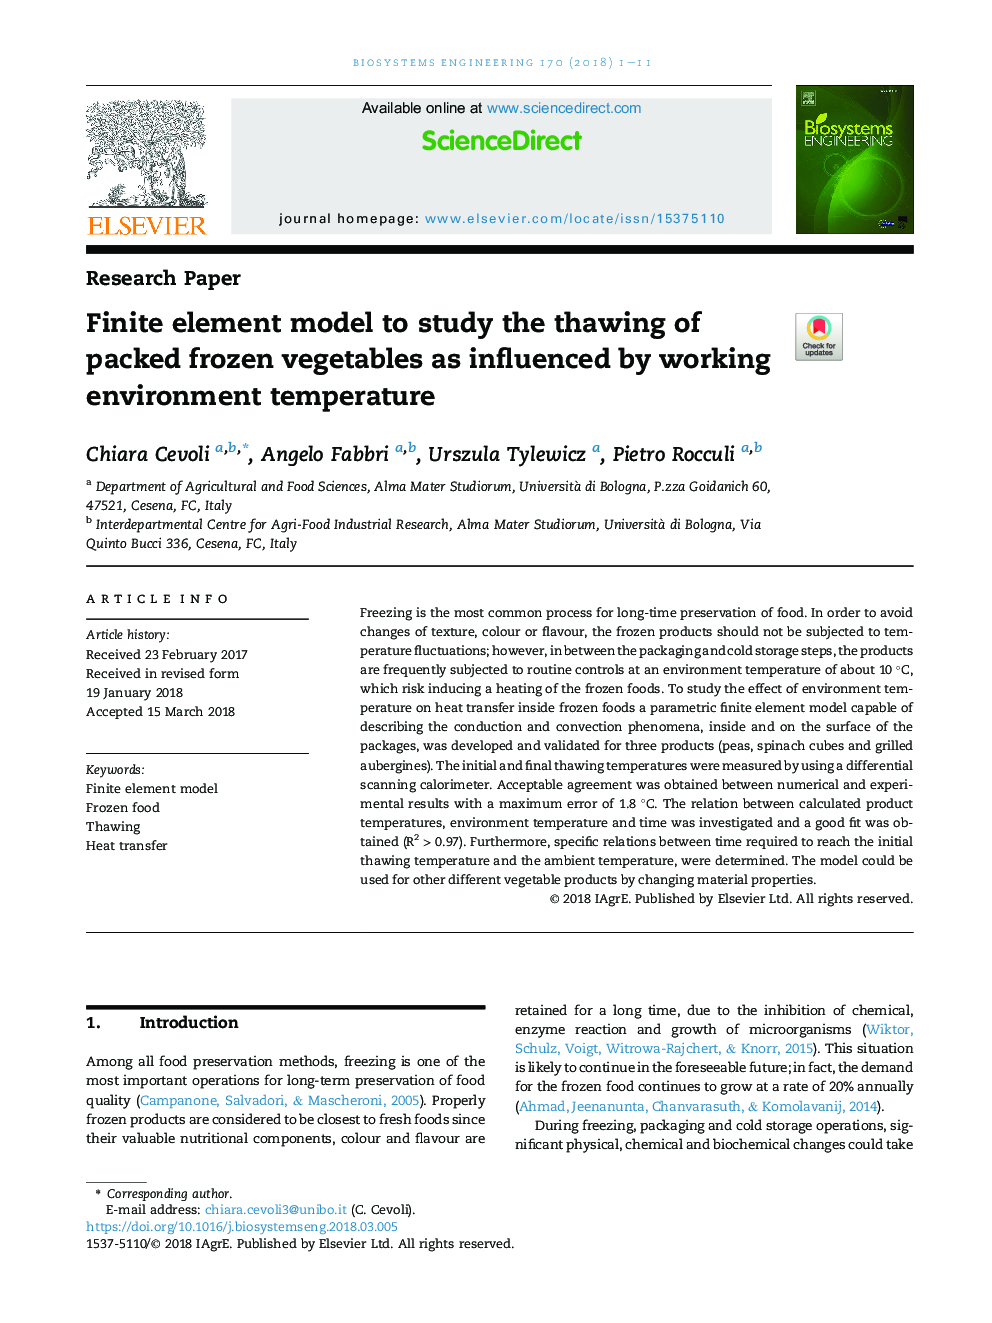 Finite element model to study the thawing of packed frozen vegetables as influenced by working environment temperature